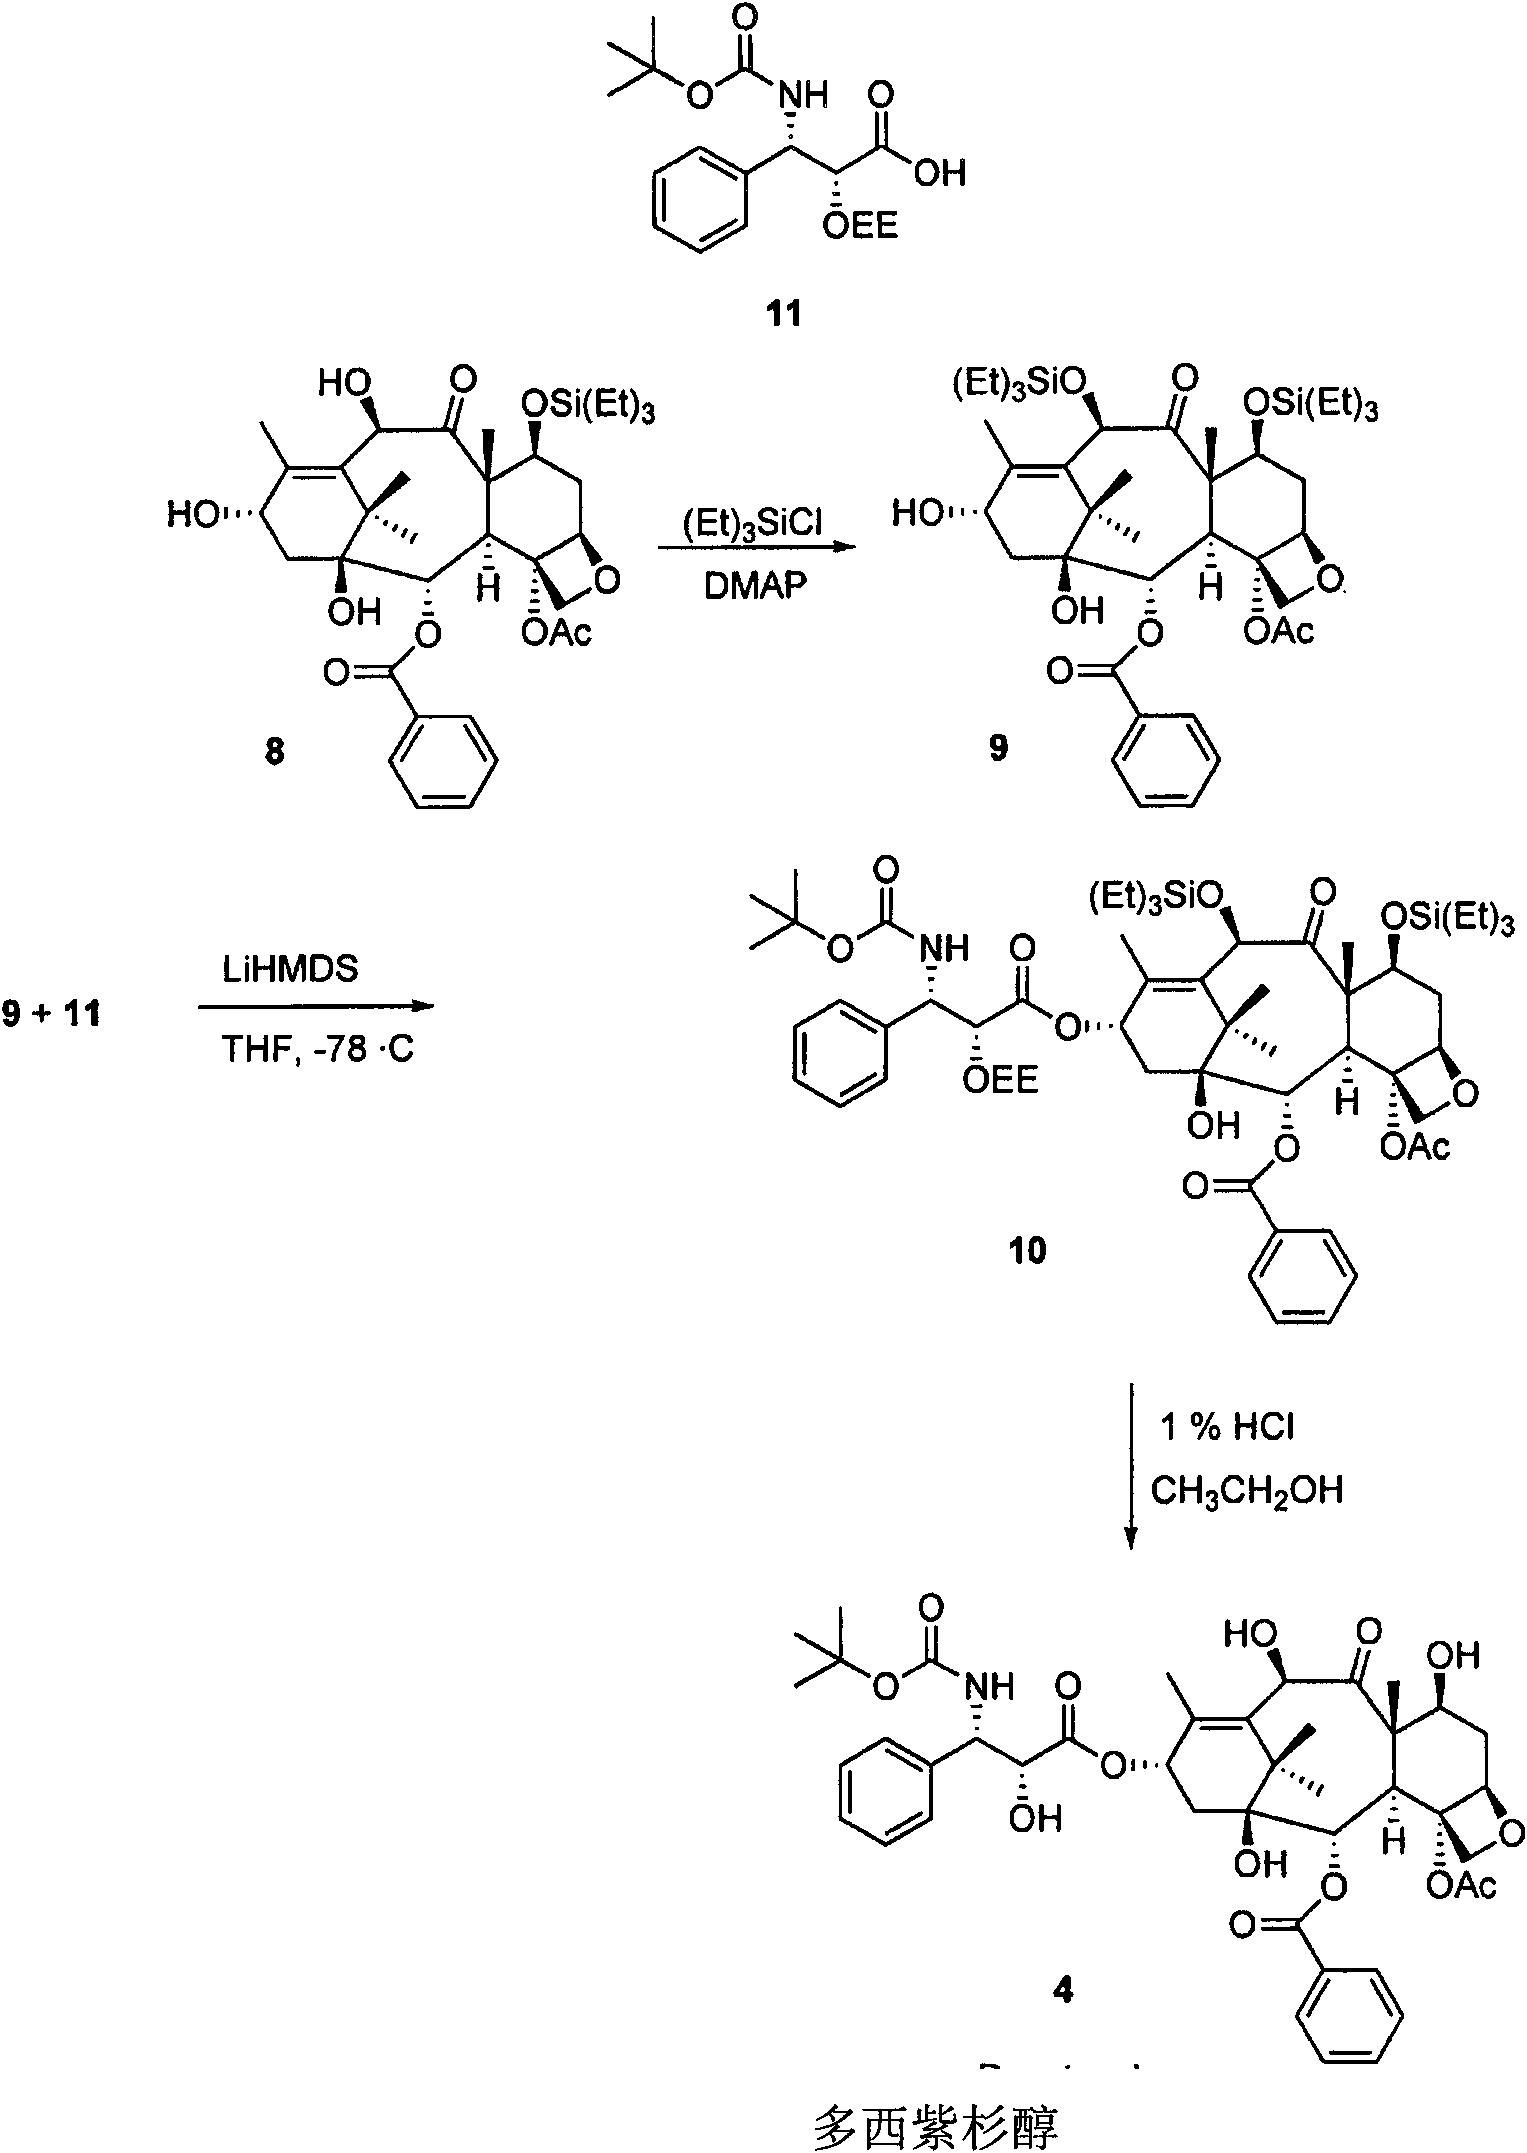 Semi-synthetic route for the preparation of paclitaxel, docetaxel and 10-deacetylbaccatin iii from 9-dihydro-13-acetylbaccatin III